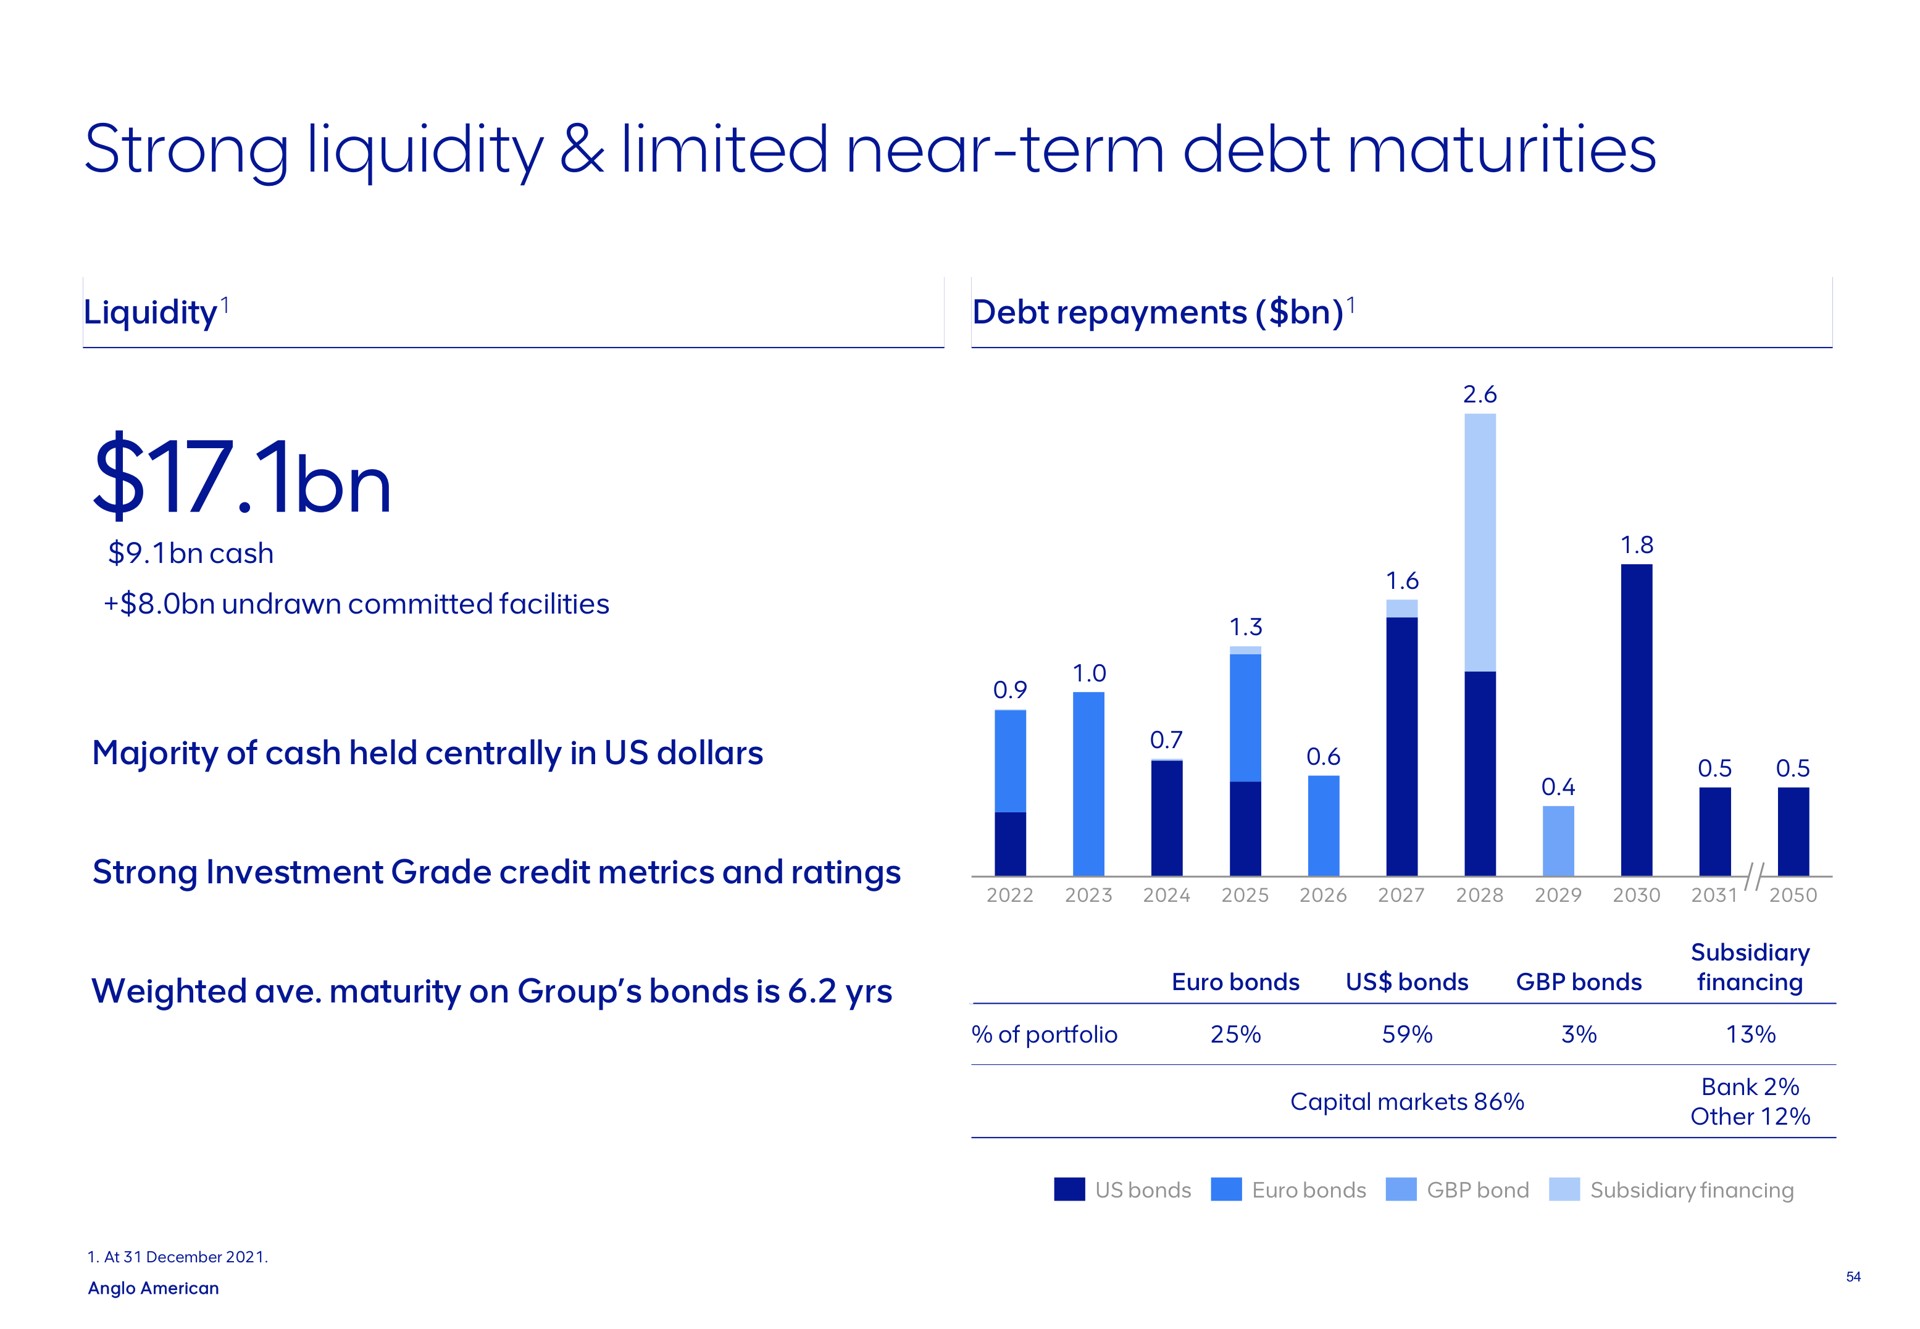 strong liquidity limited near term debt maturities | AngloAmerican